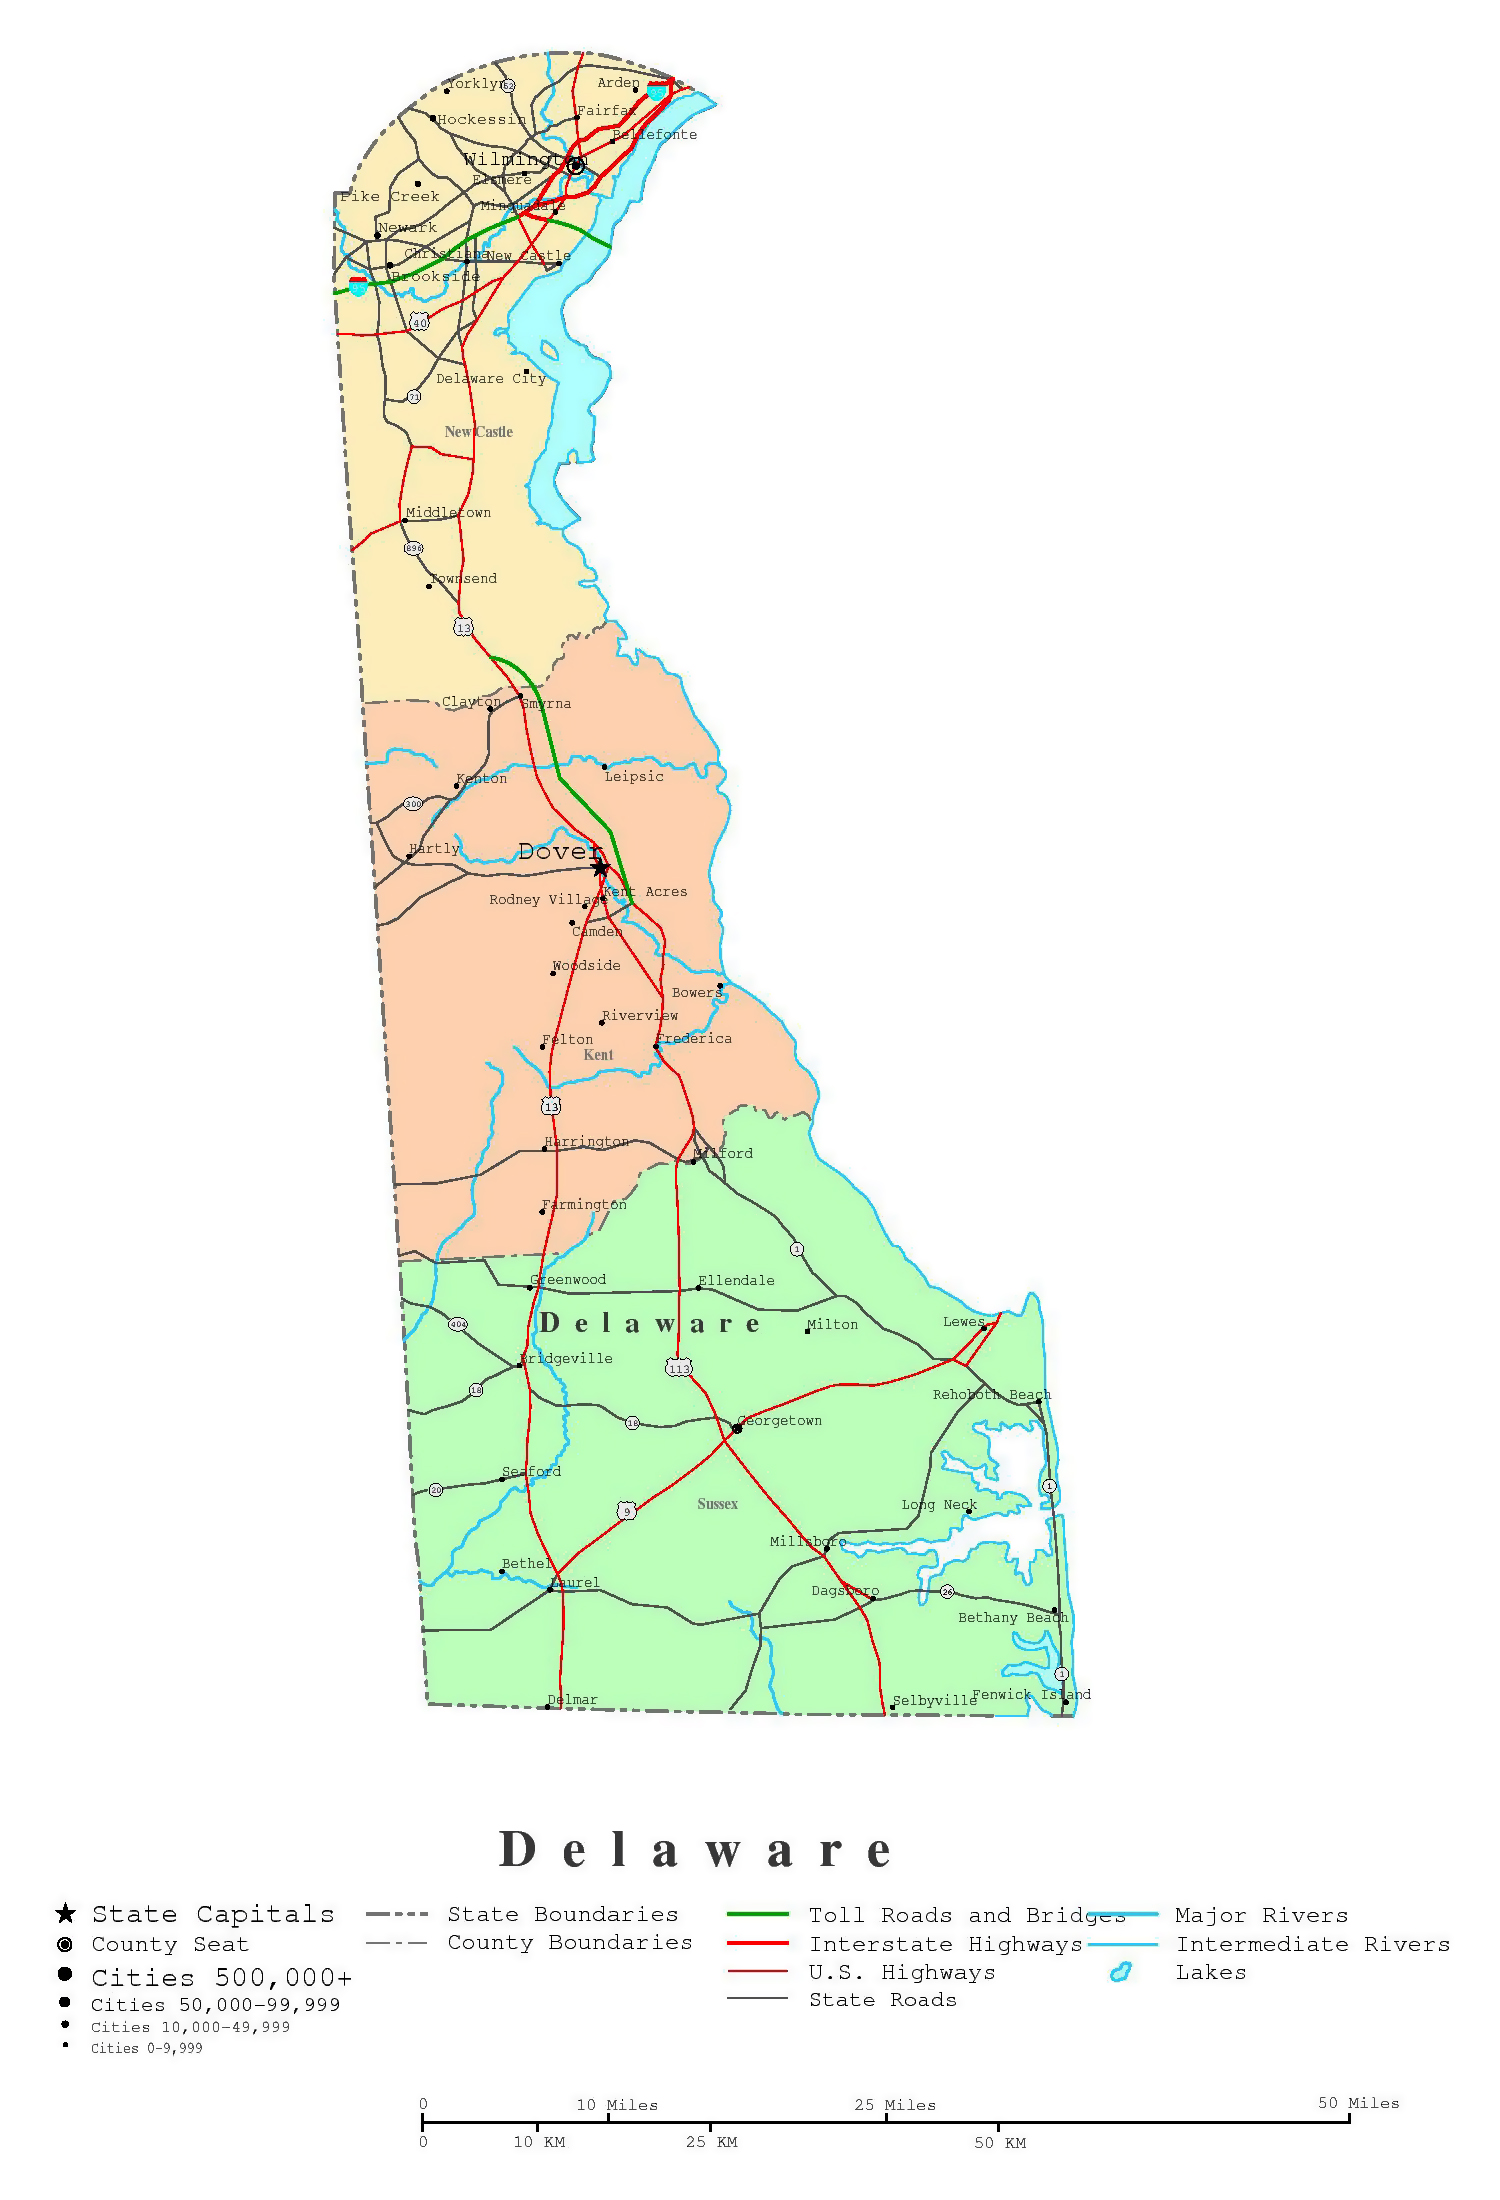 Large Detailed Administrative Map Of Delaware State With Roads | The ...